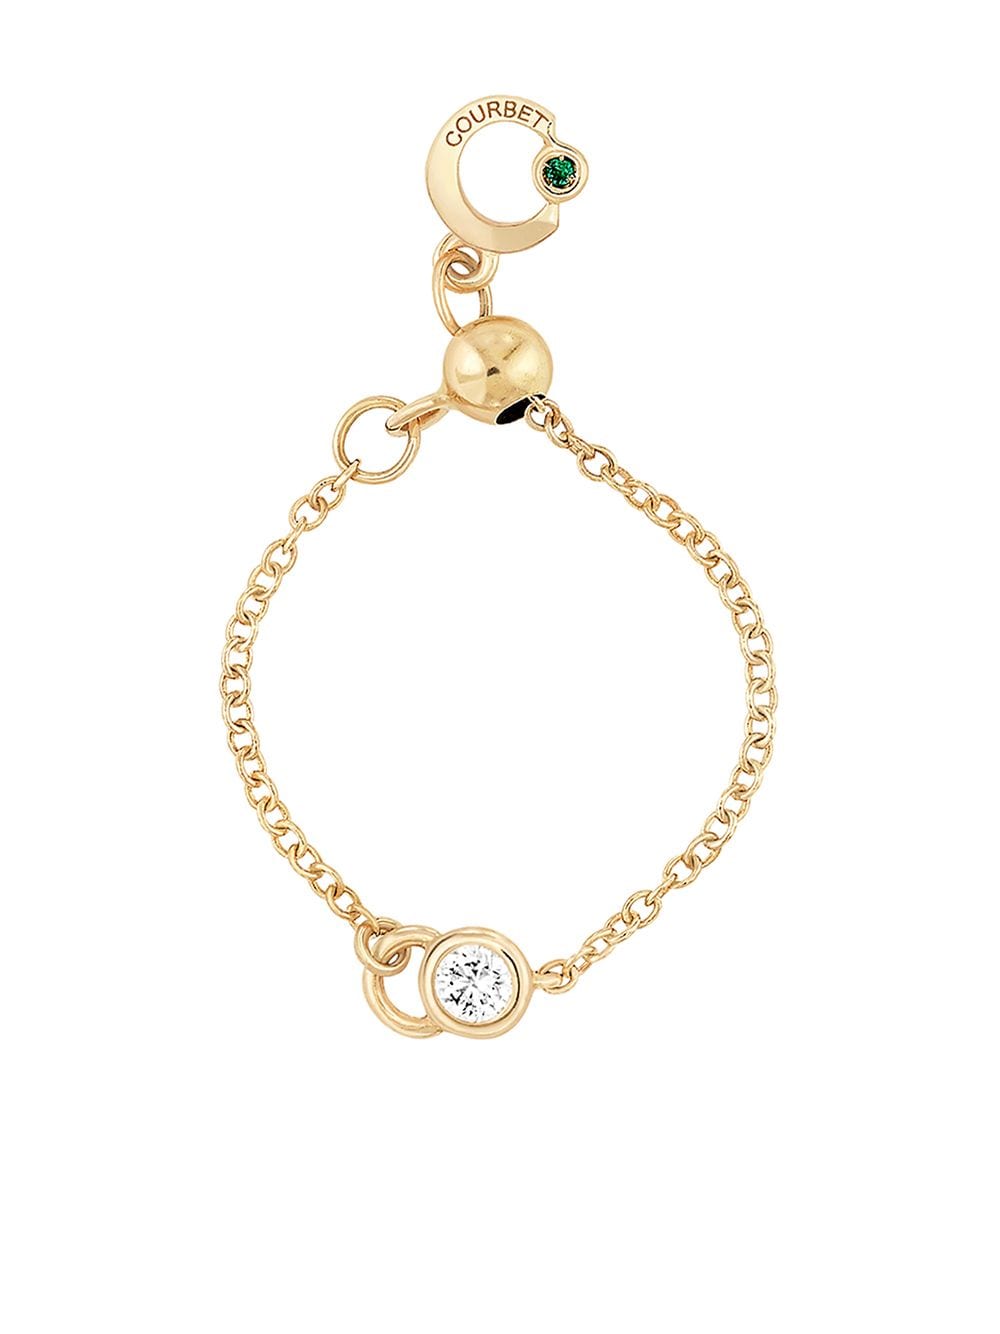 Courbet 18kt recycled yellow gold CO adjustable chain laboratory-grown diamond ring von Courbet